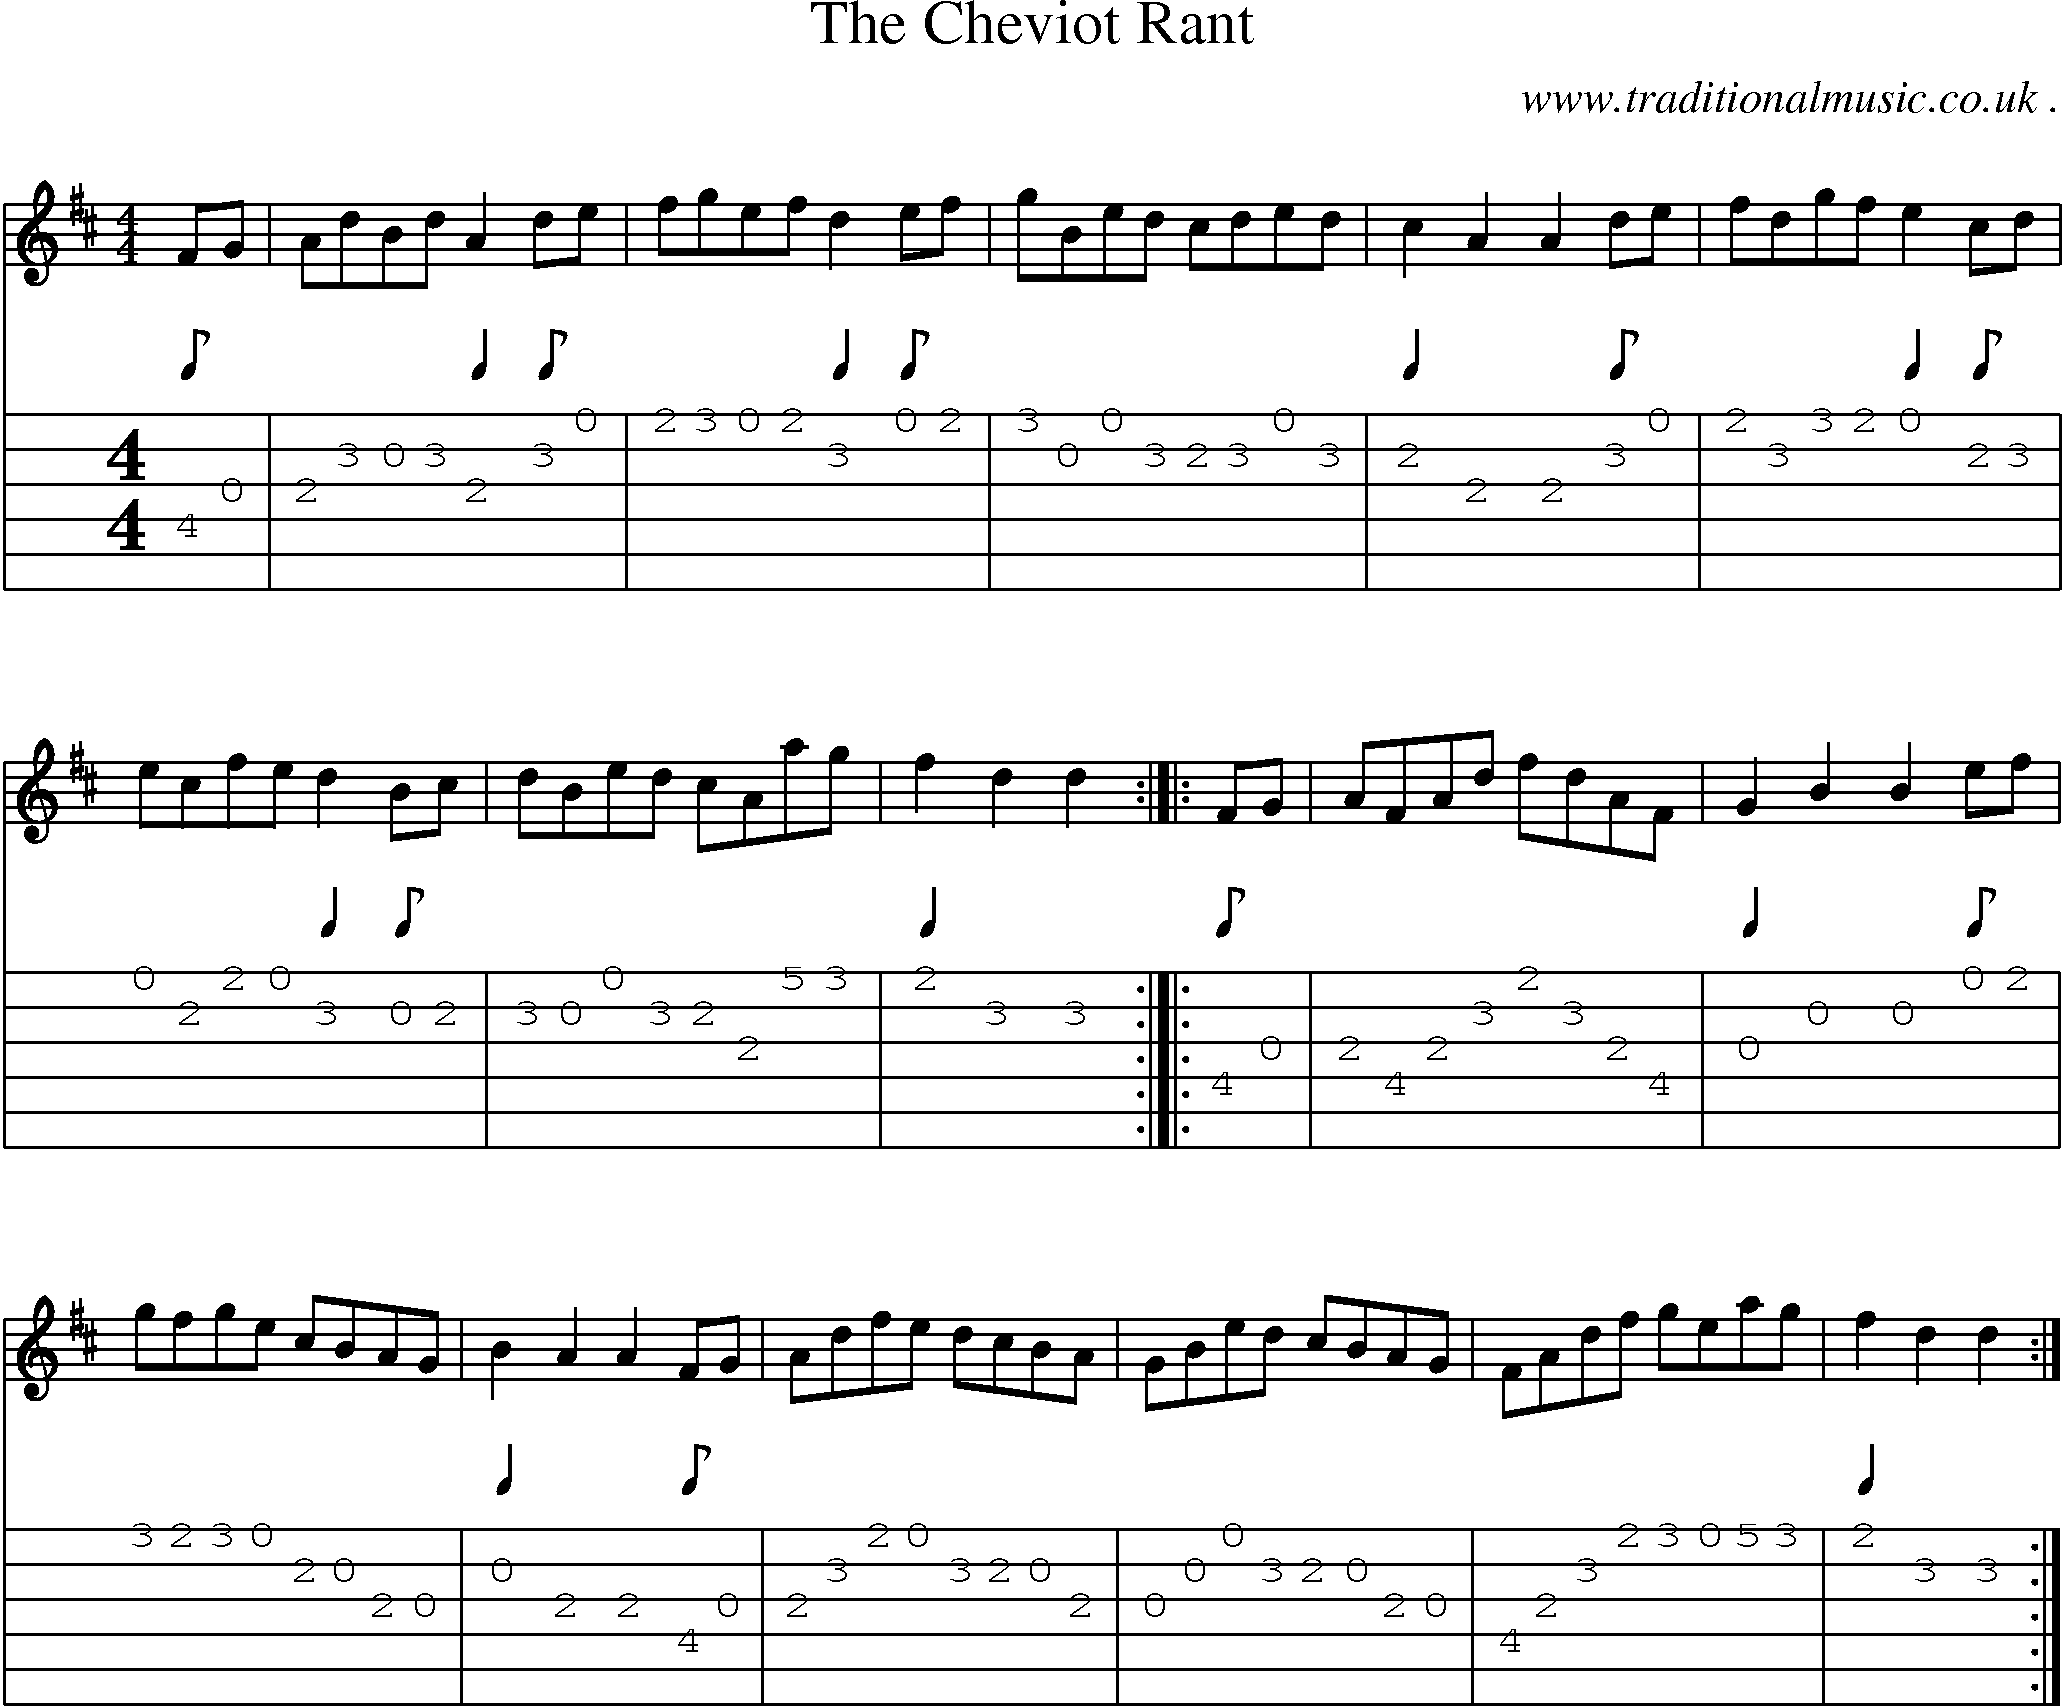 Sheet-music  score, Chords and Guitar Tabs for The Cheviot Rant